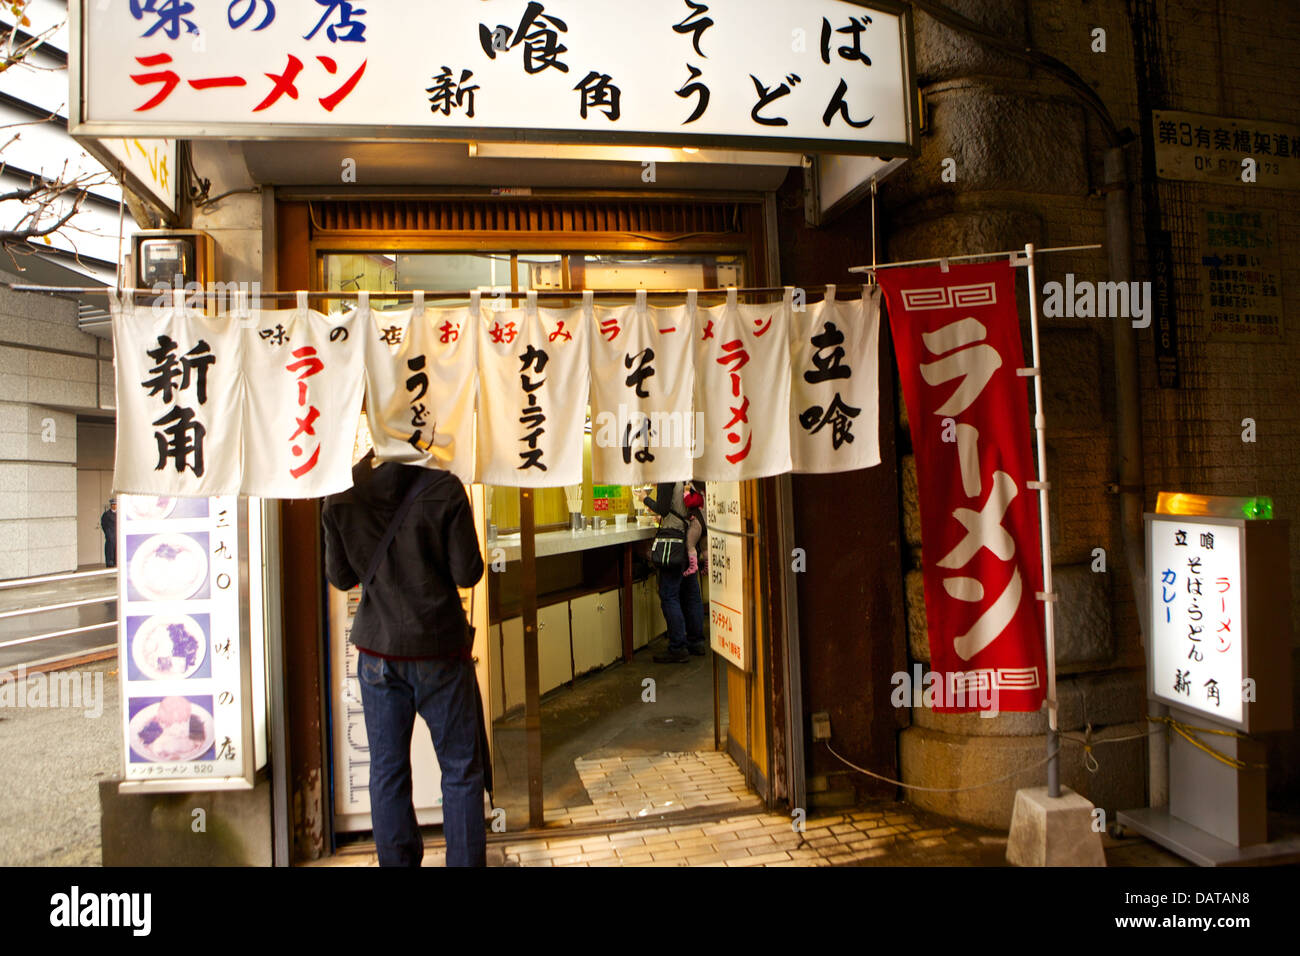 Man standing outside Japanese fast food, Tokyo Japan Stock Photo